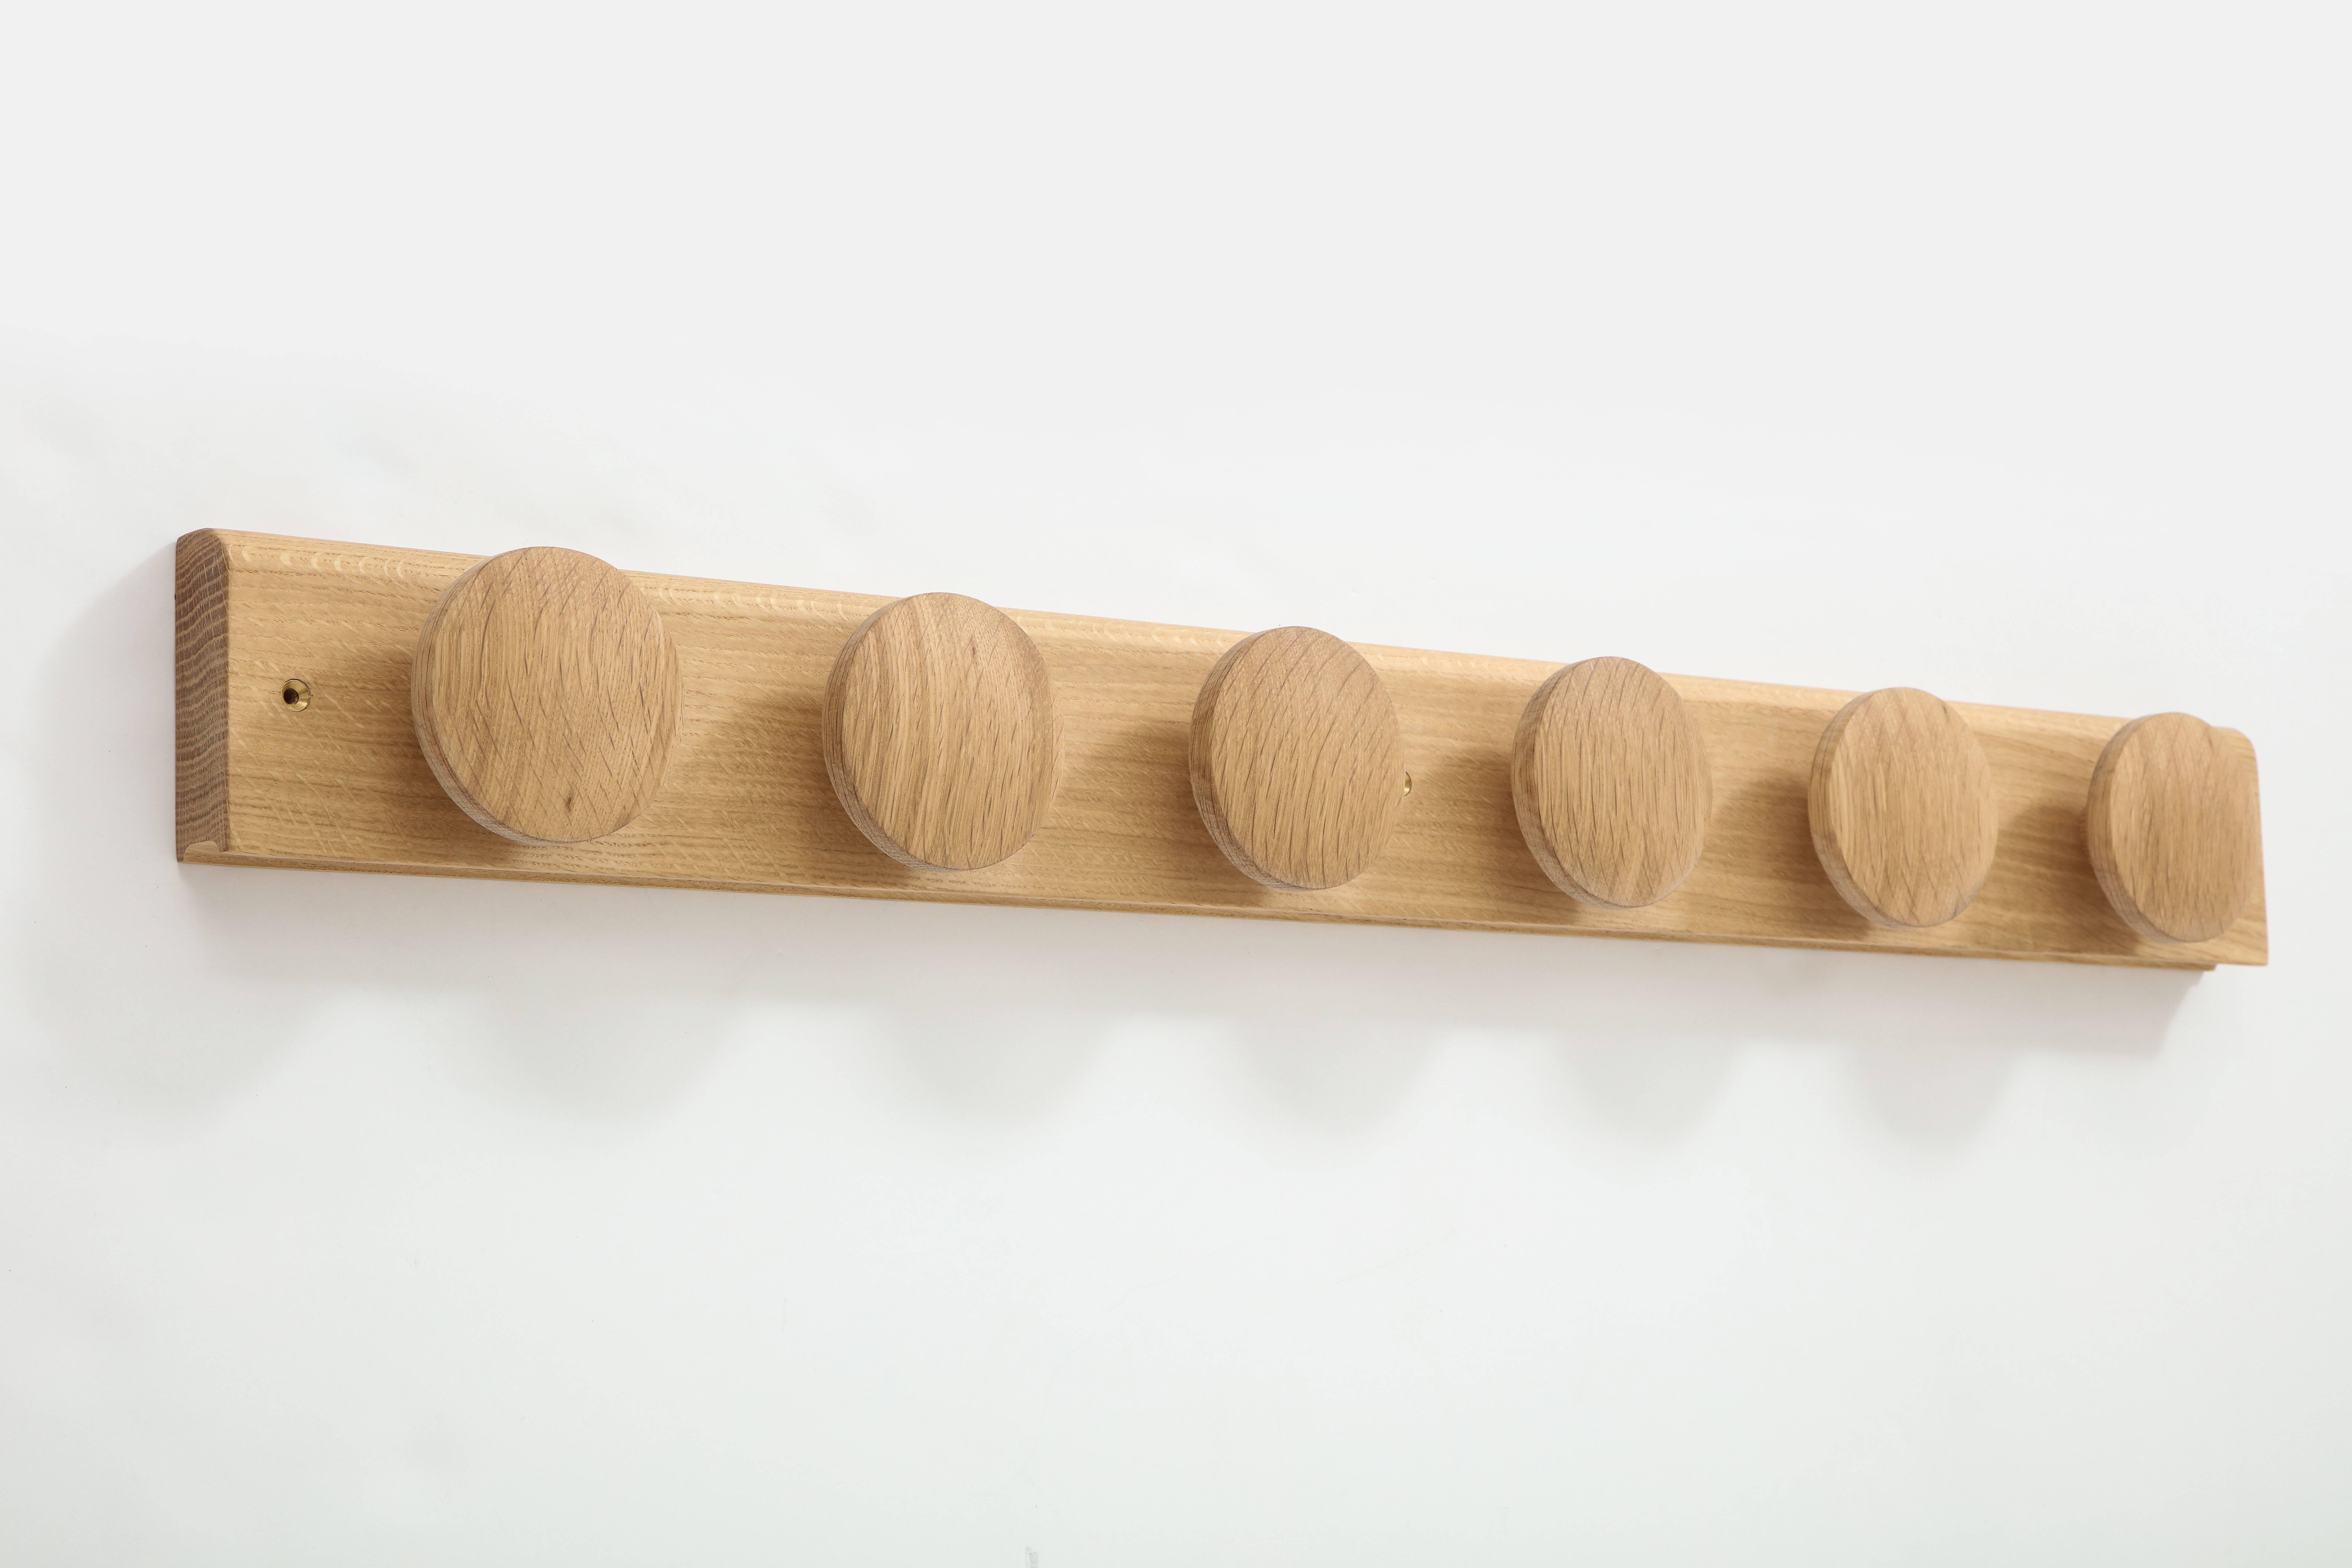 Mokume, a Japanese term for beauty of wood grain, is the design theme of this gorgeous and very functional coat rack. Six disc-shaped coat hooks in generous 4